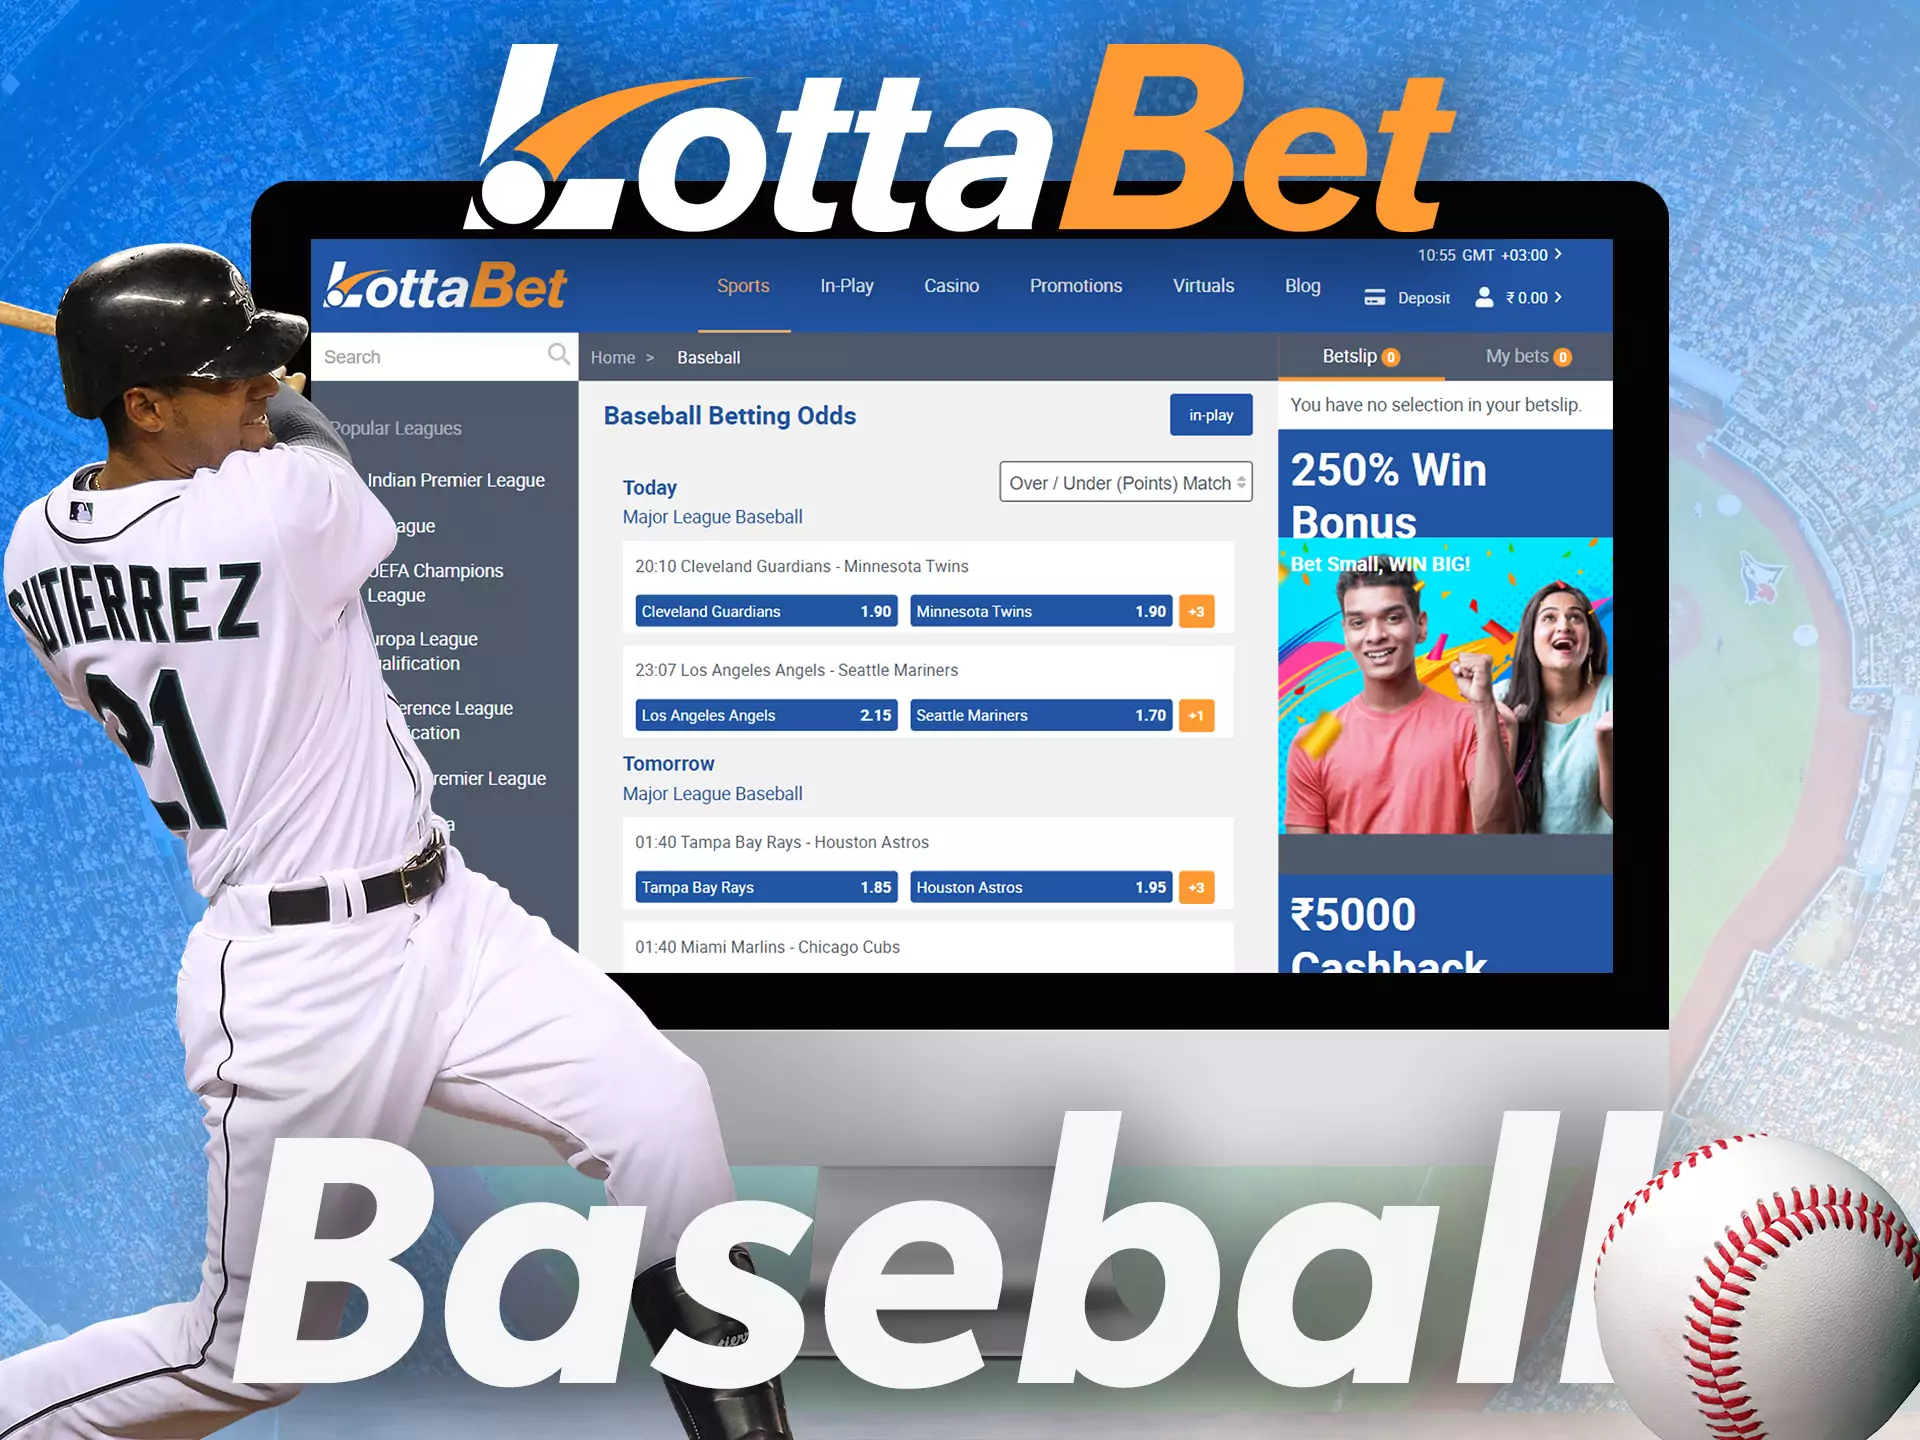 In the Lottabet sportsbook, fans of baseball find actual baseball matches.